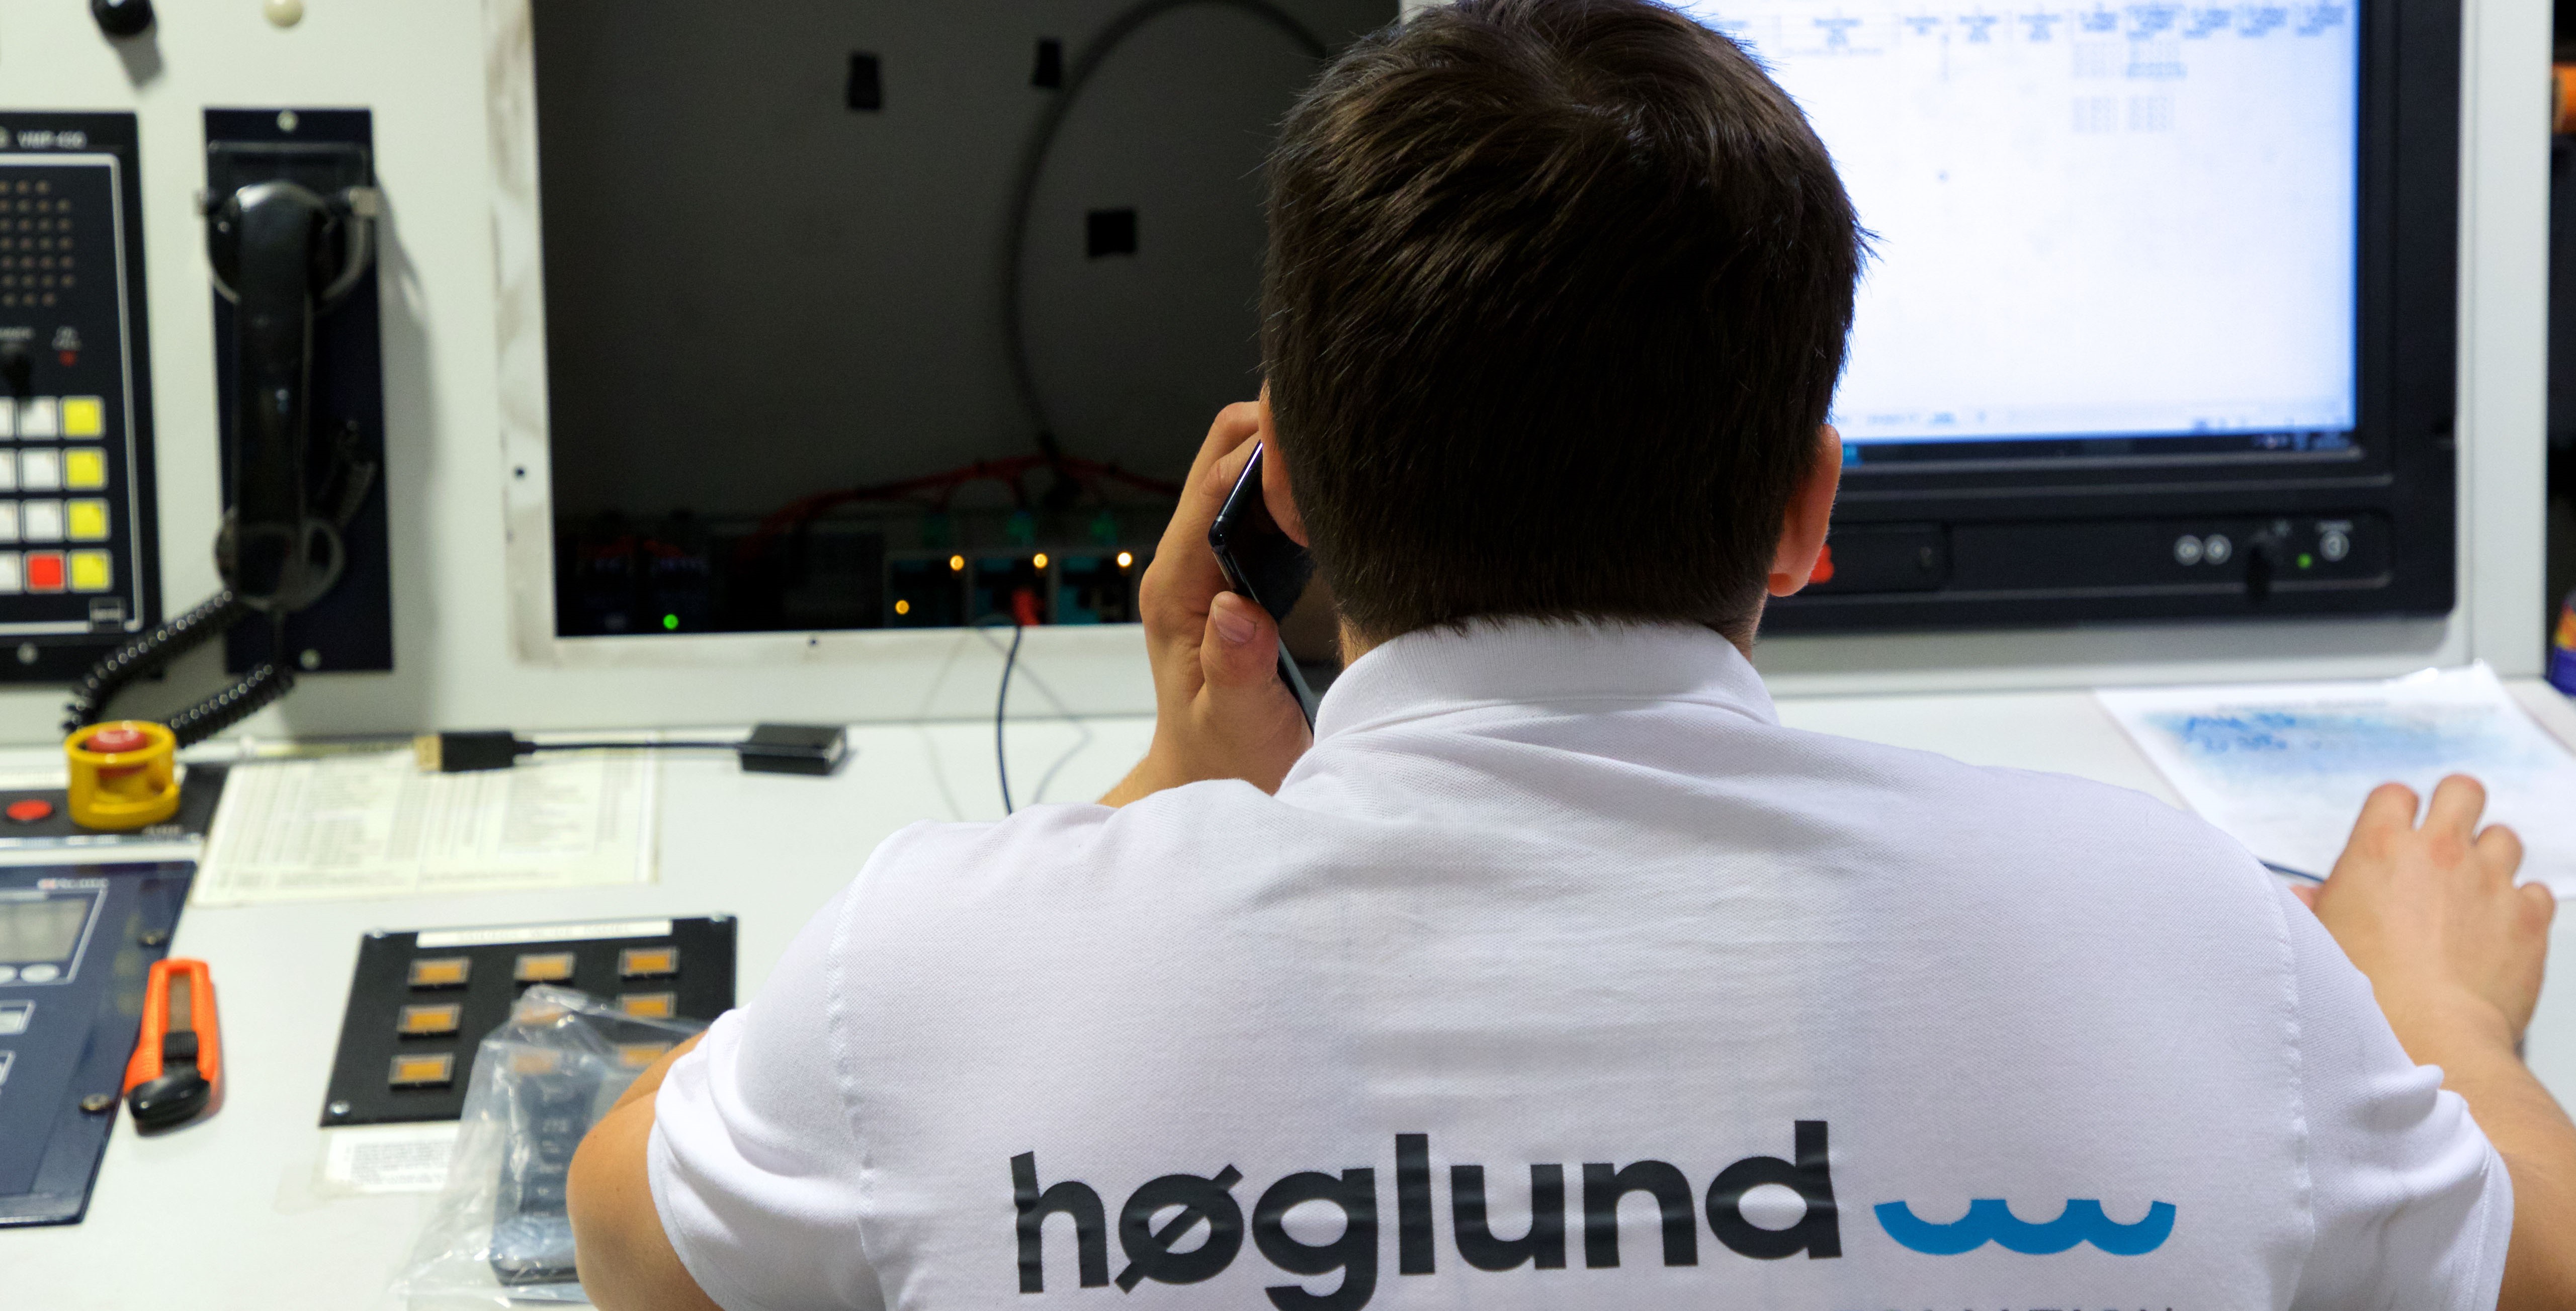 Høglund Playback- helps you understand the root cause of the problem in just a few minutes